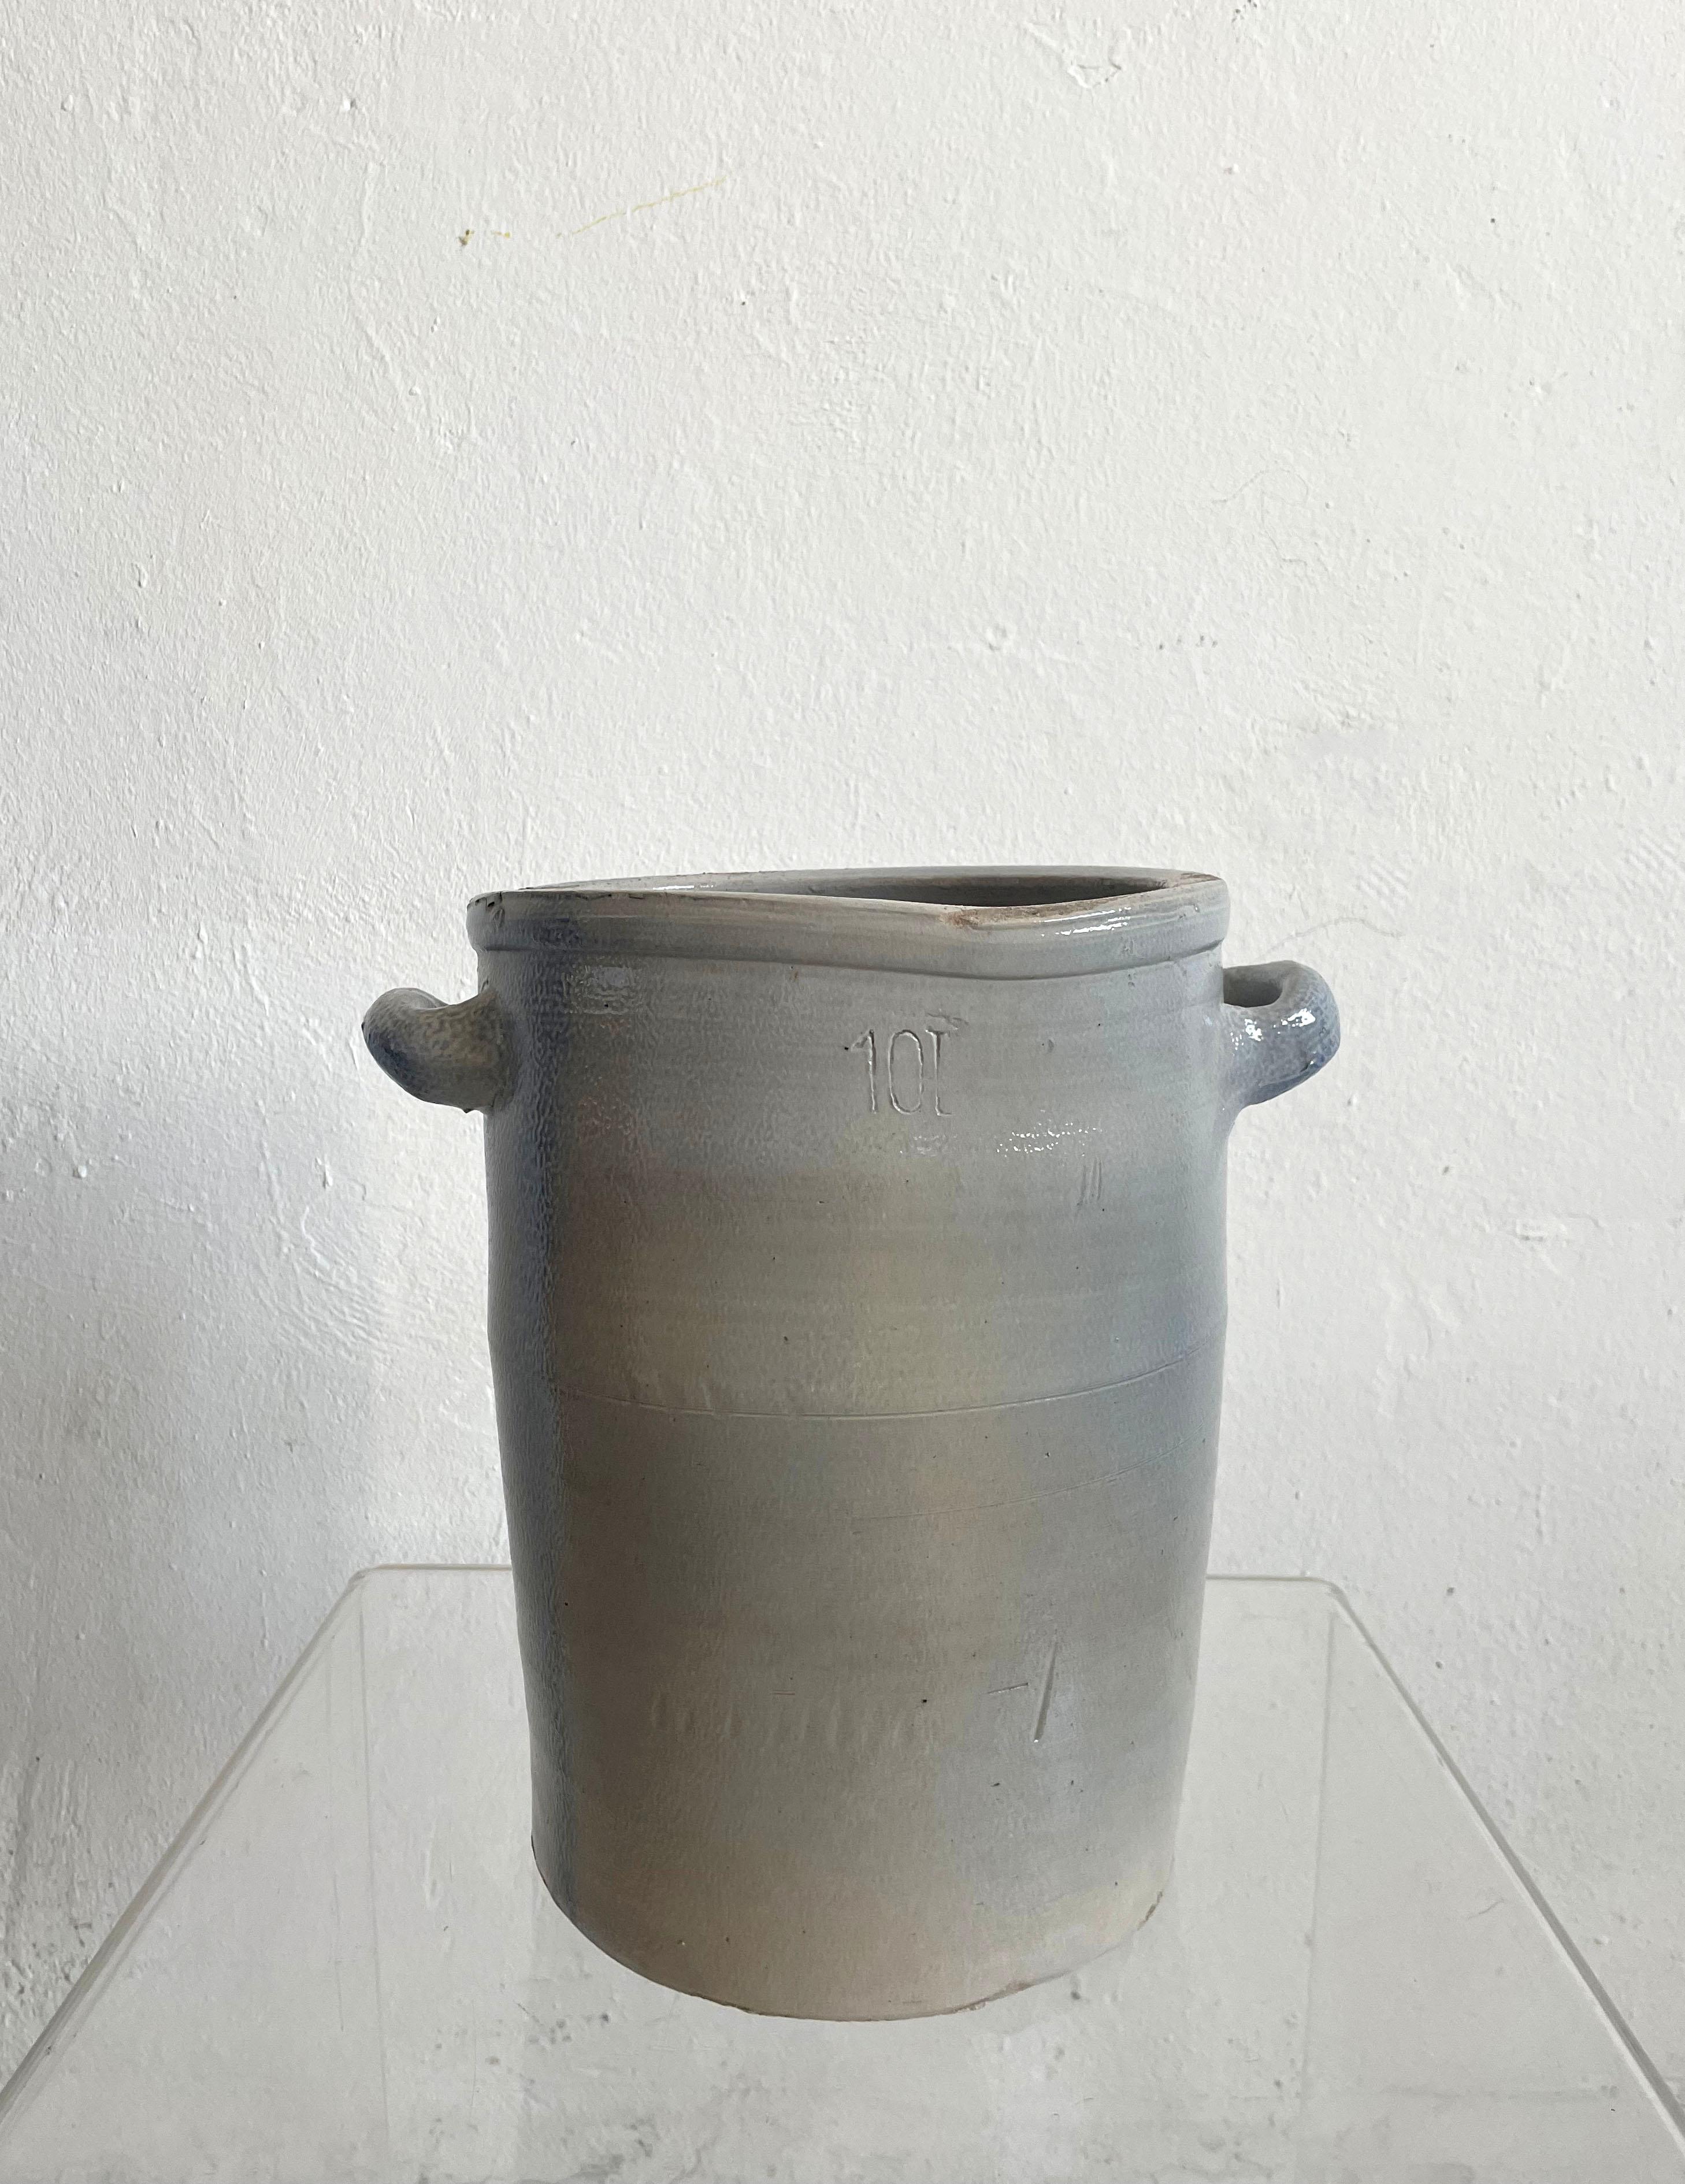 Stunning large and heavy vintage Mid-century stoneware jug with handles

Beautiful greyish-blue glaze

marked '10L'

Unknown manufacturer

weights 4.80 kg

The item remains in a very good original condition with minimal traces of cosmetic